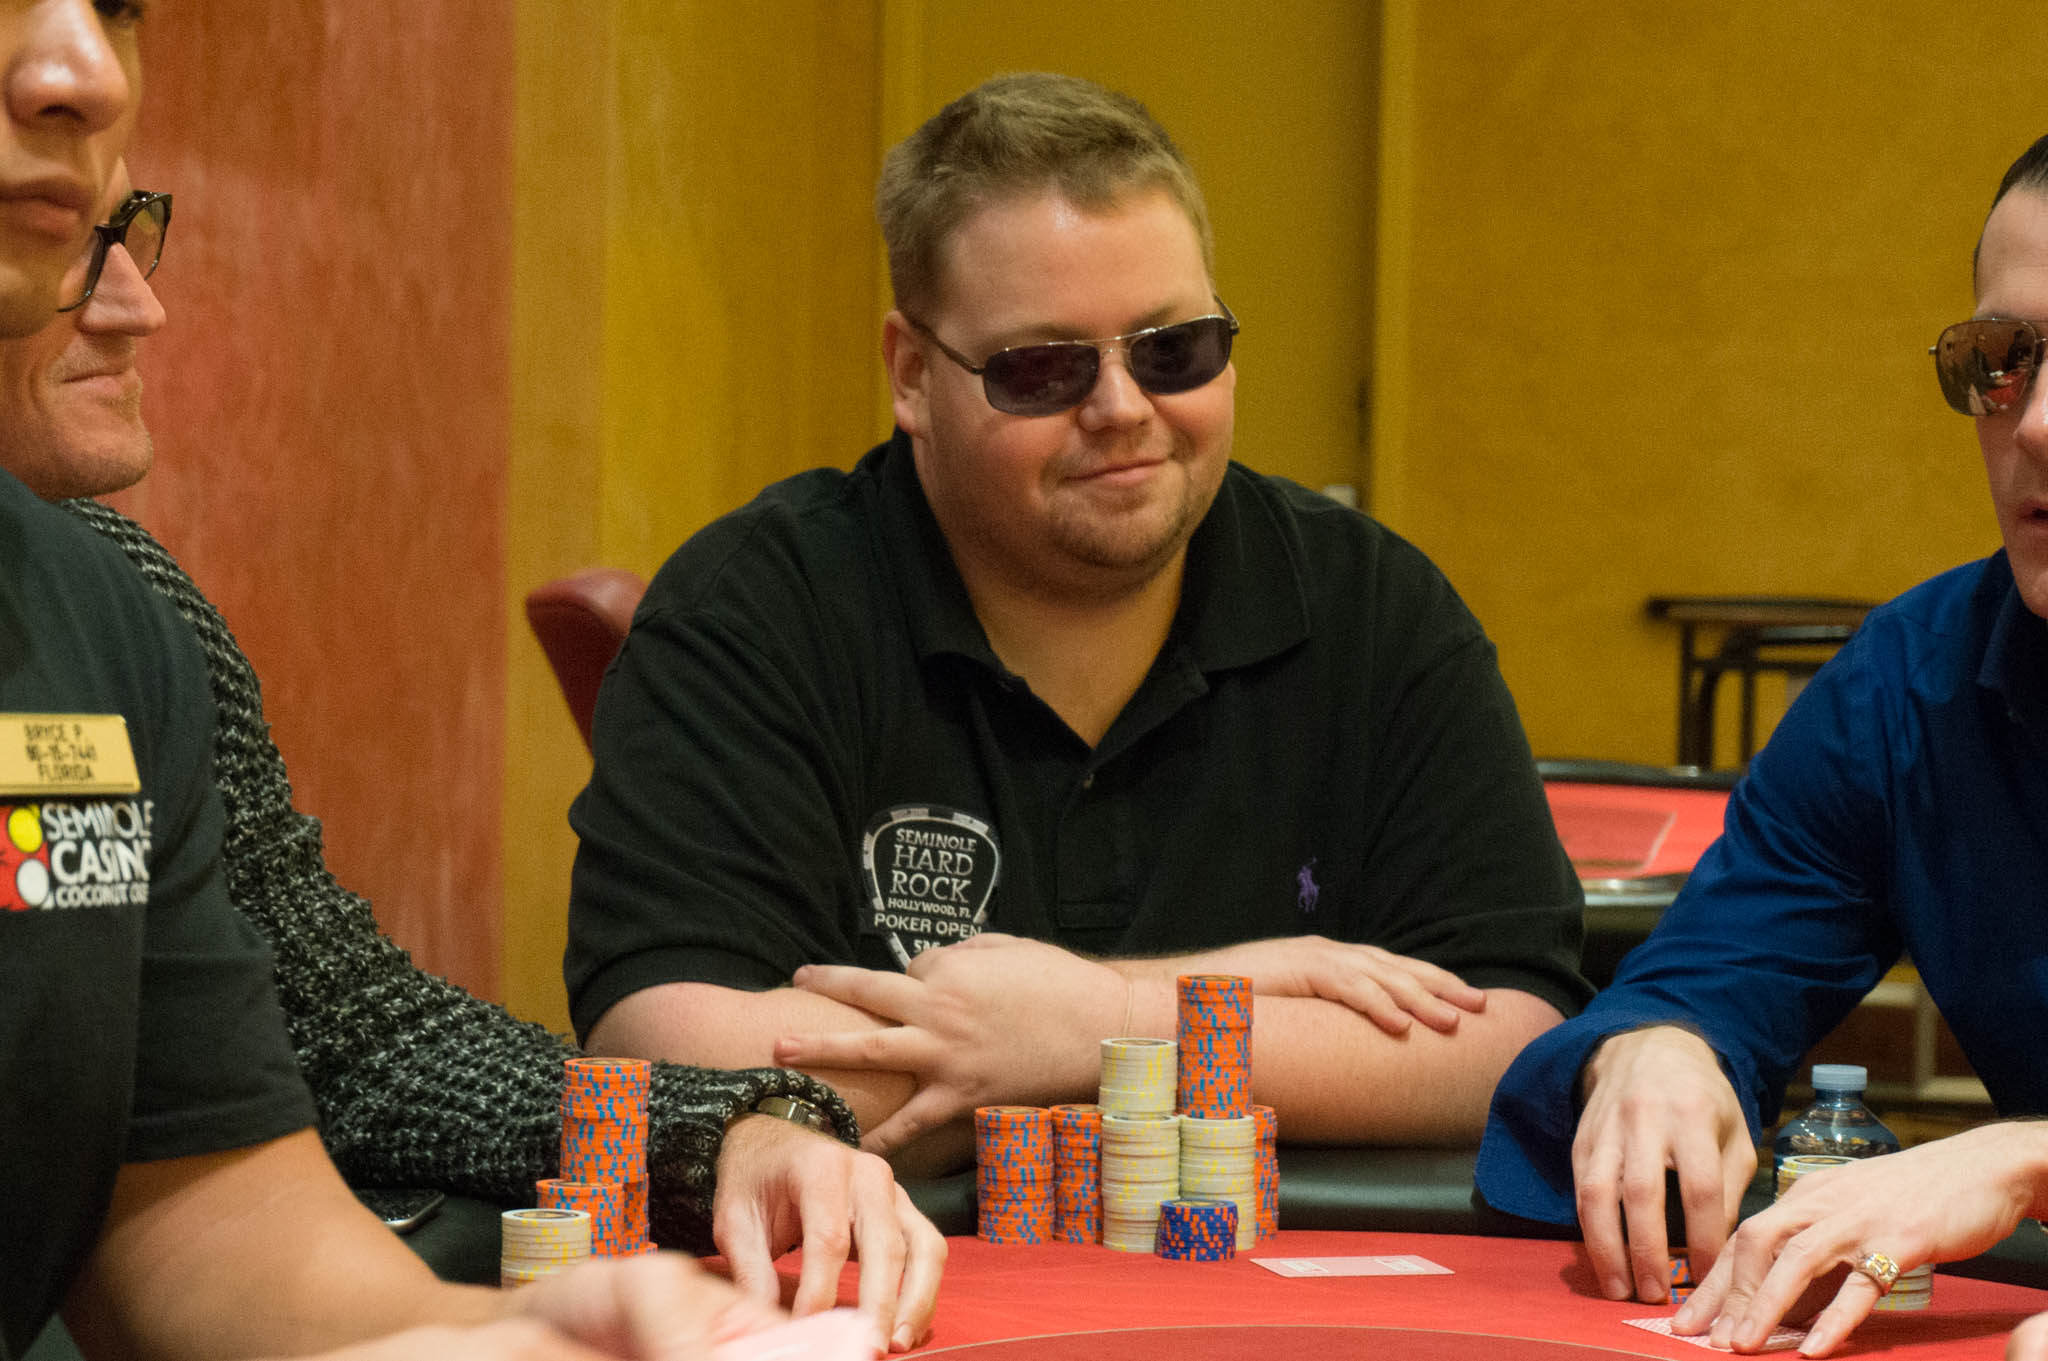 Michael Laake - 10th Place ($12,000)